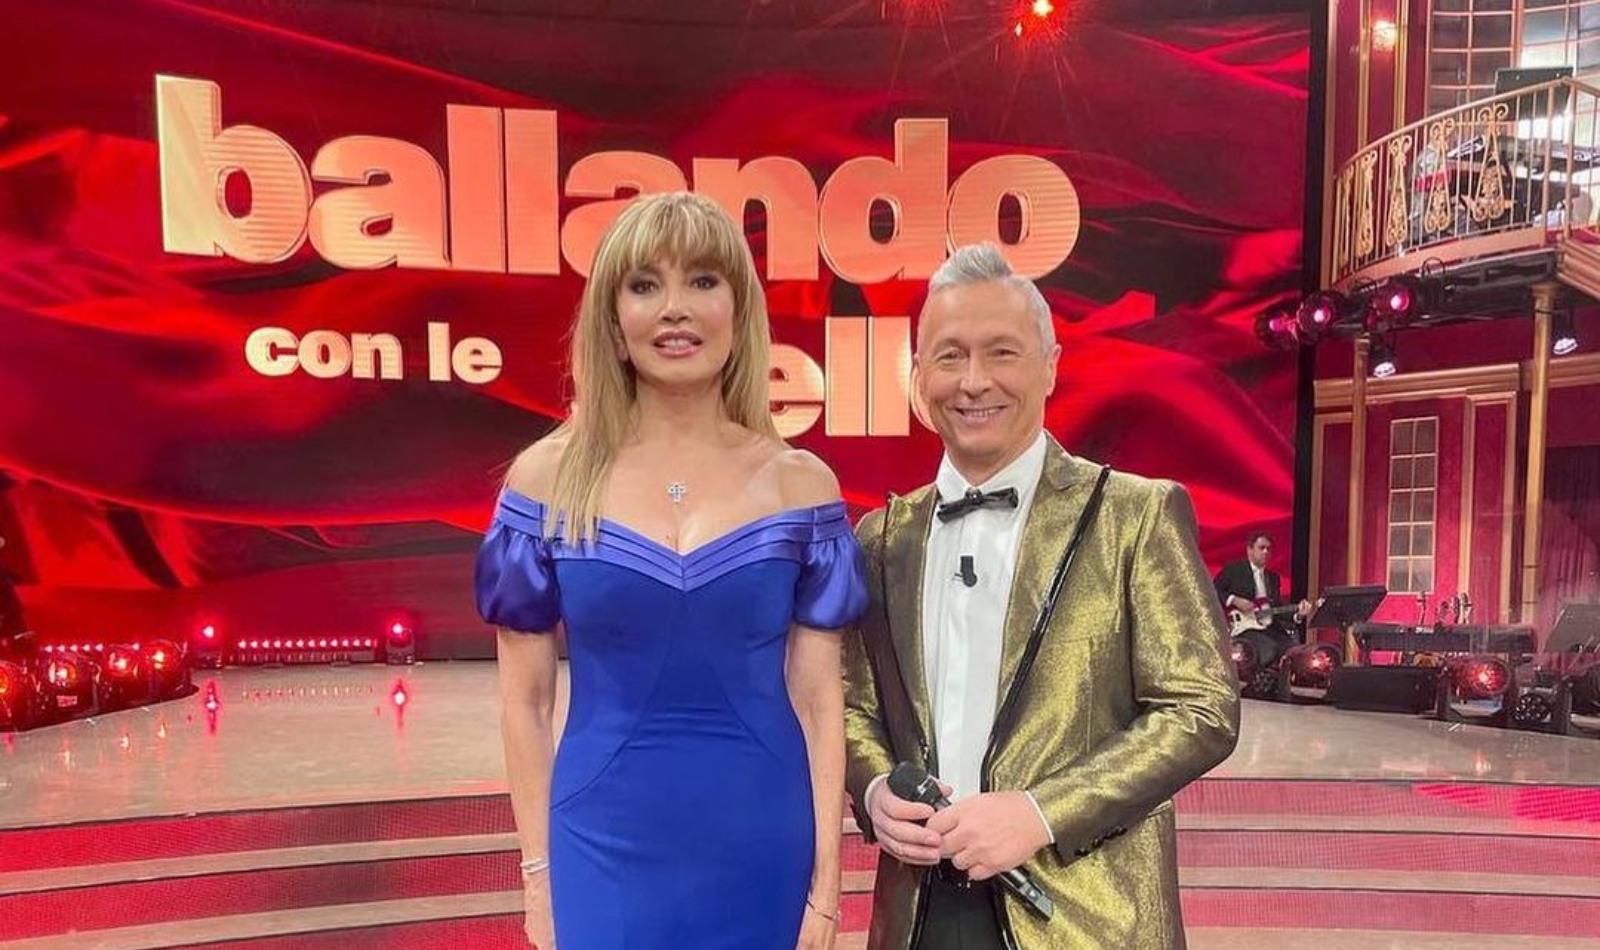 Milly Carlucci and Paolo Belli